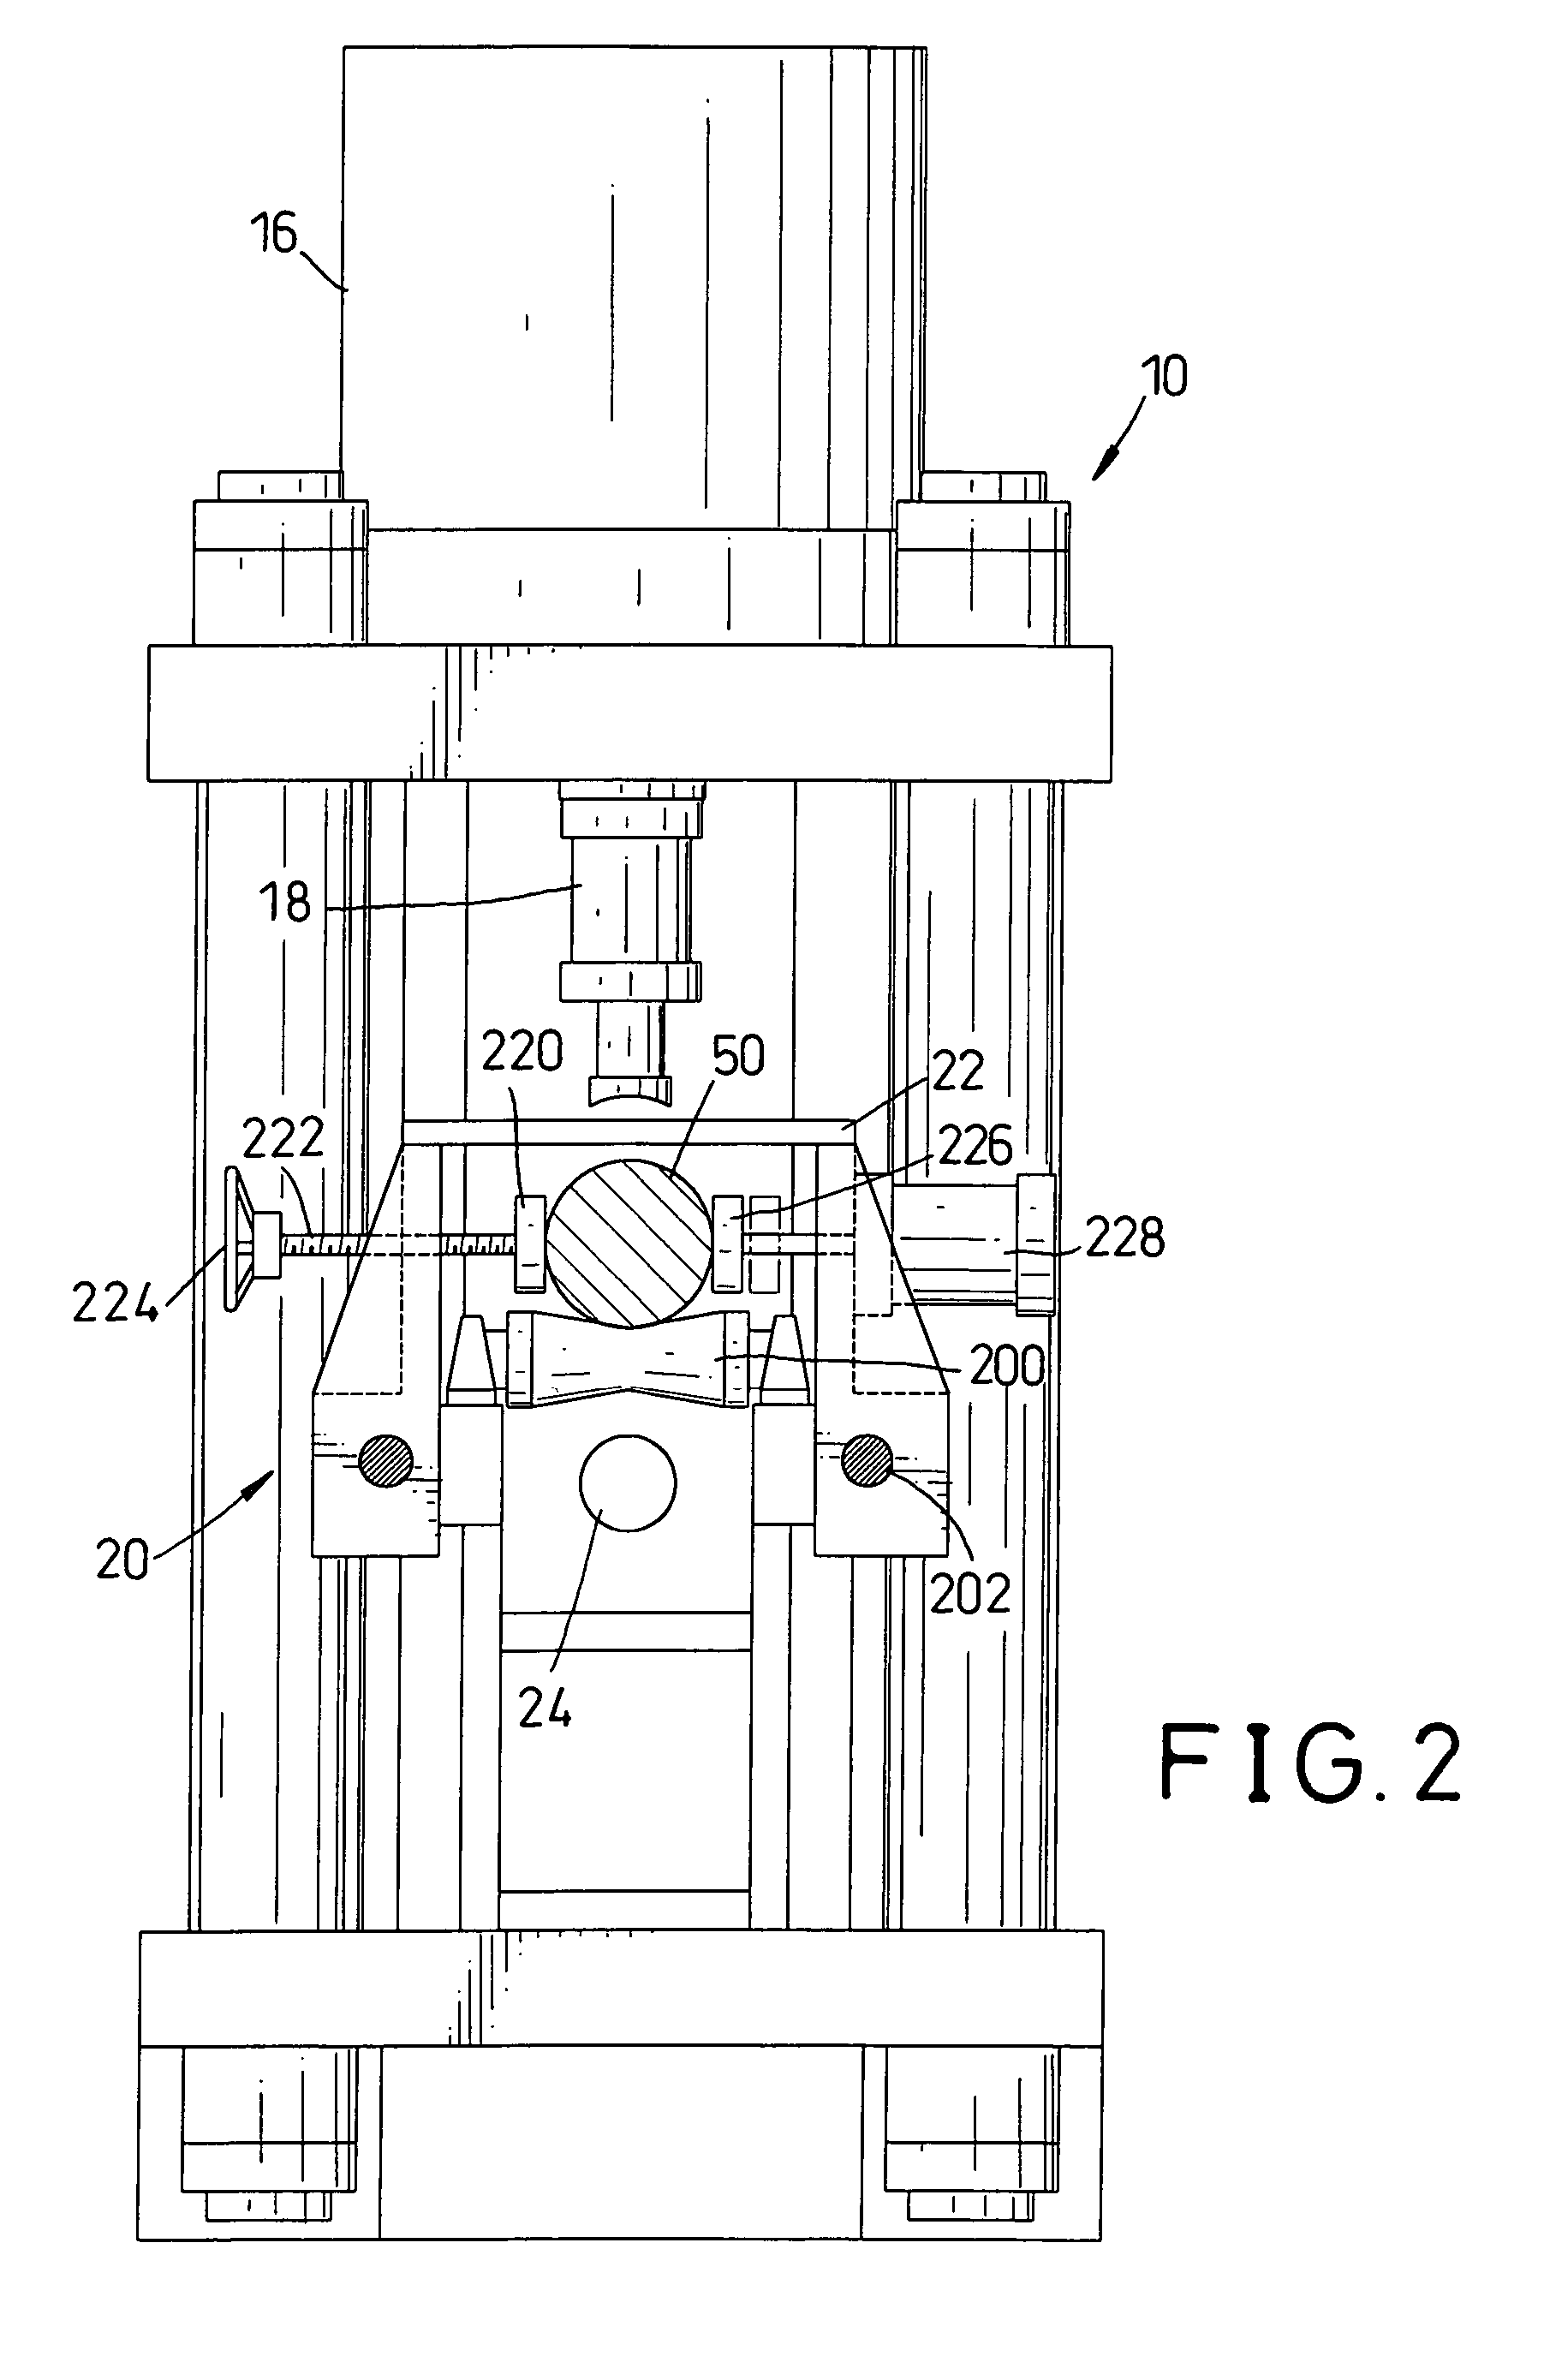 Hydraulic cutting device for cutting a raw aluminum material